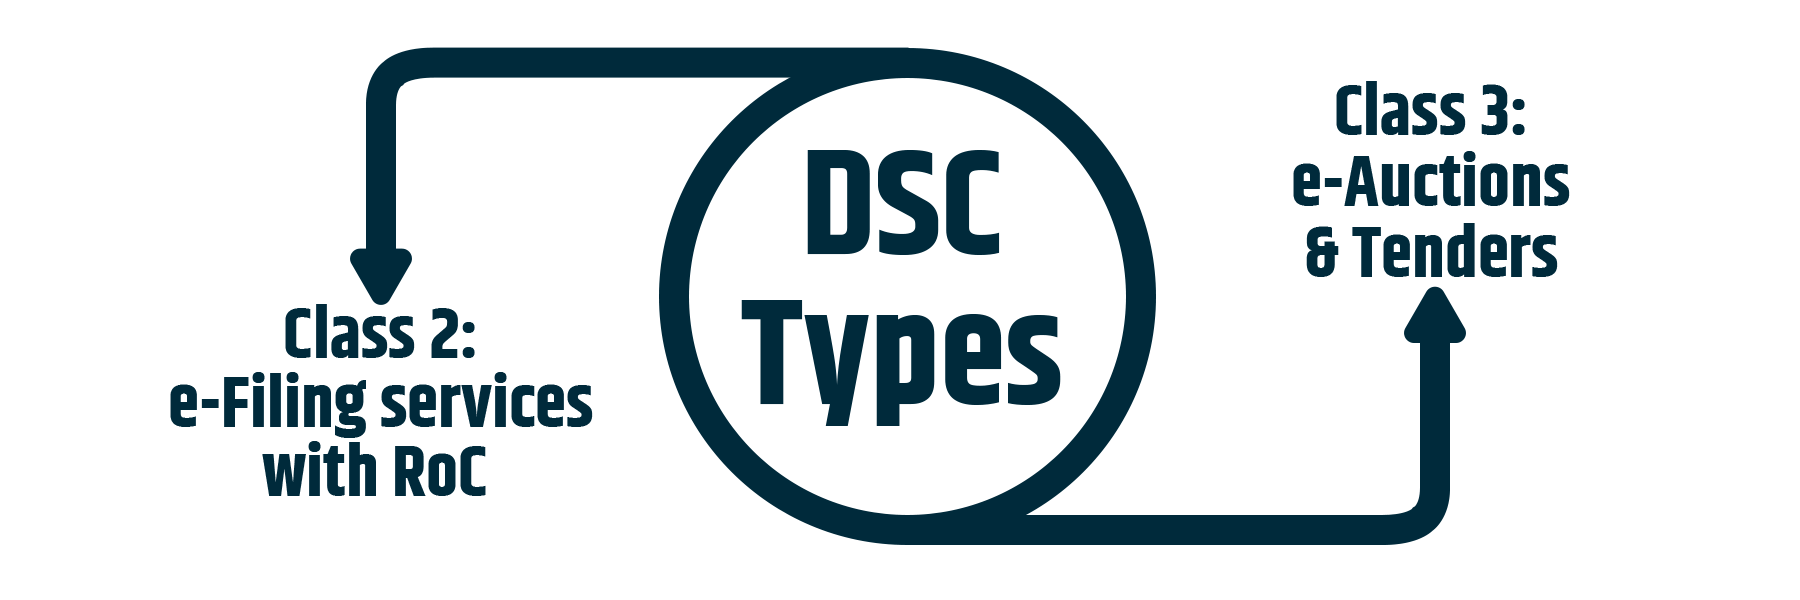 Types of DSC in India are Class 2 and Class3